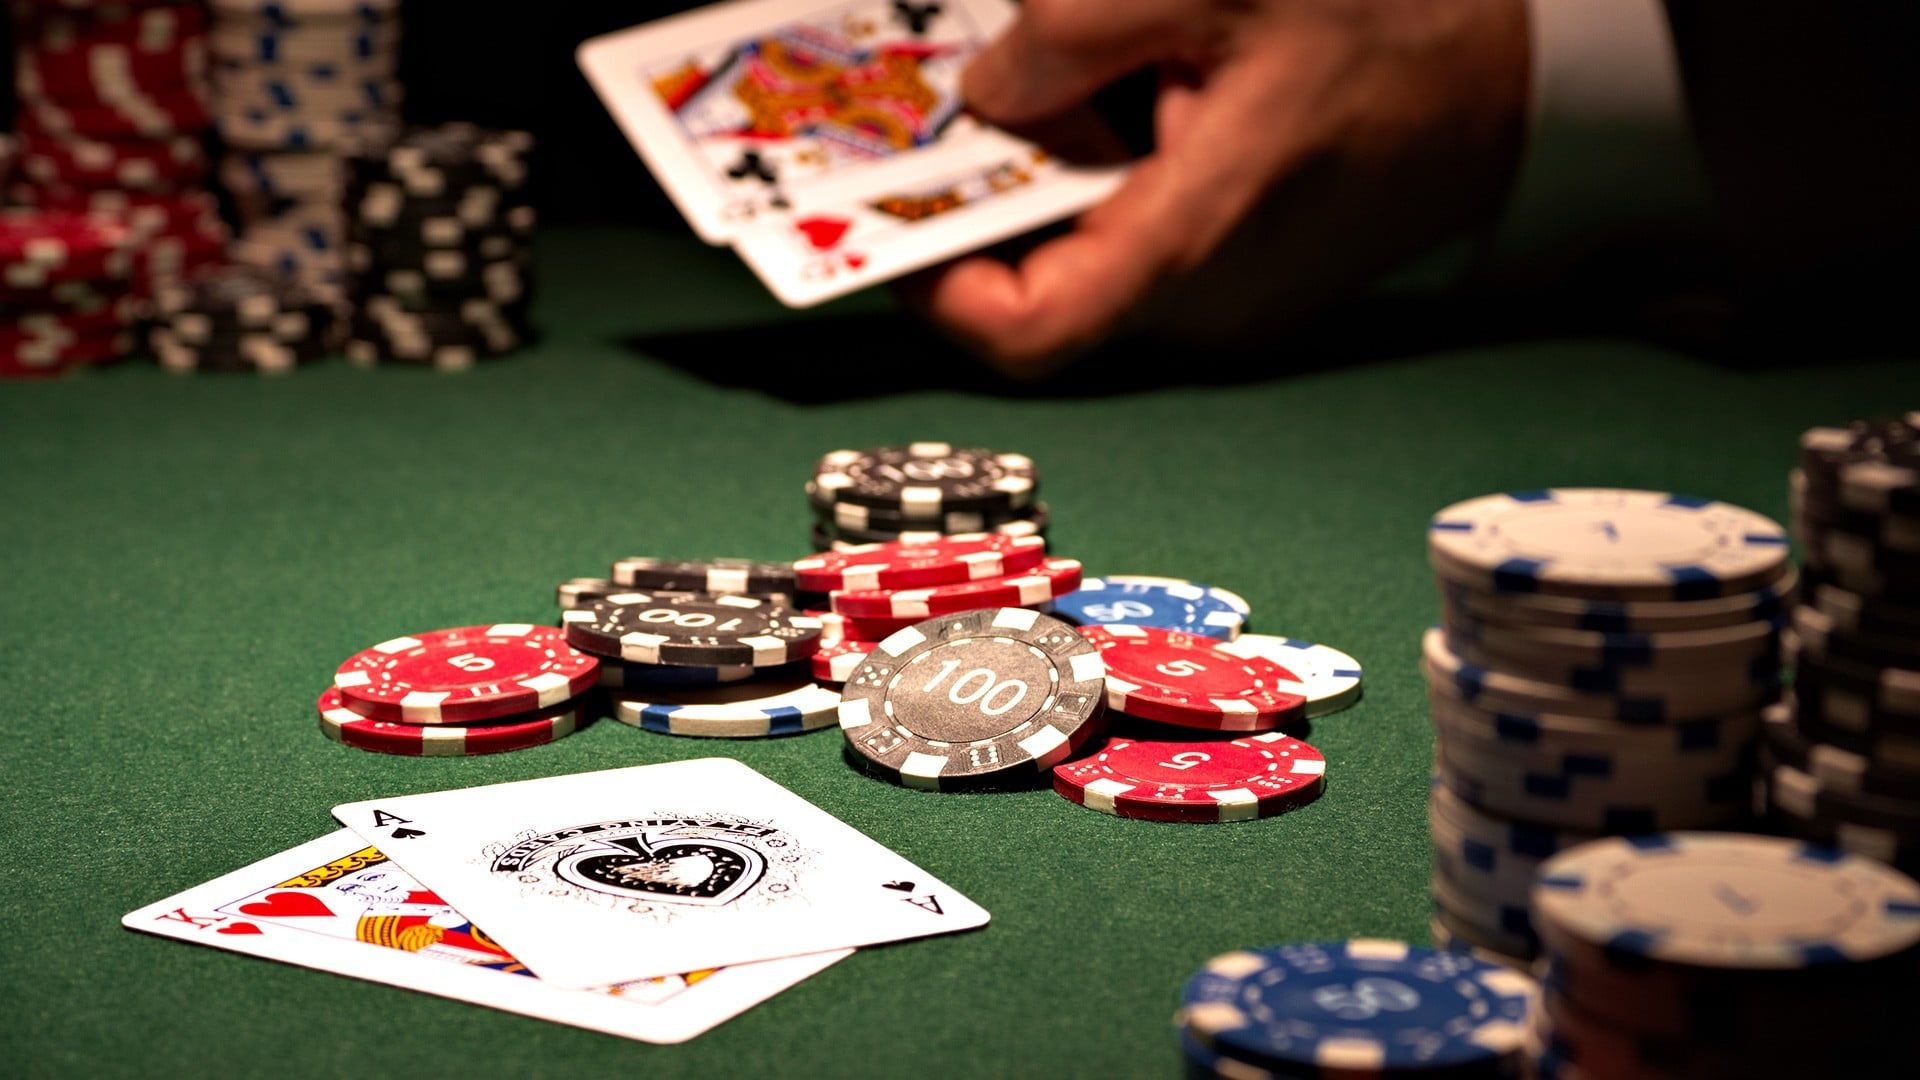 5 Practical Ways To Turn Casino Into A Gross Sales Machine